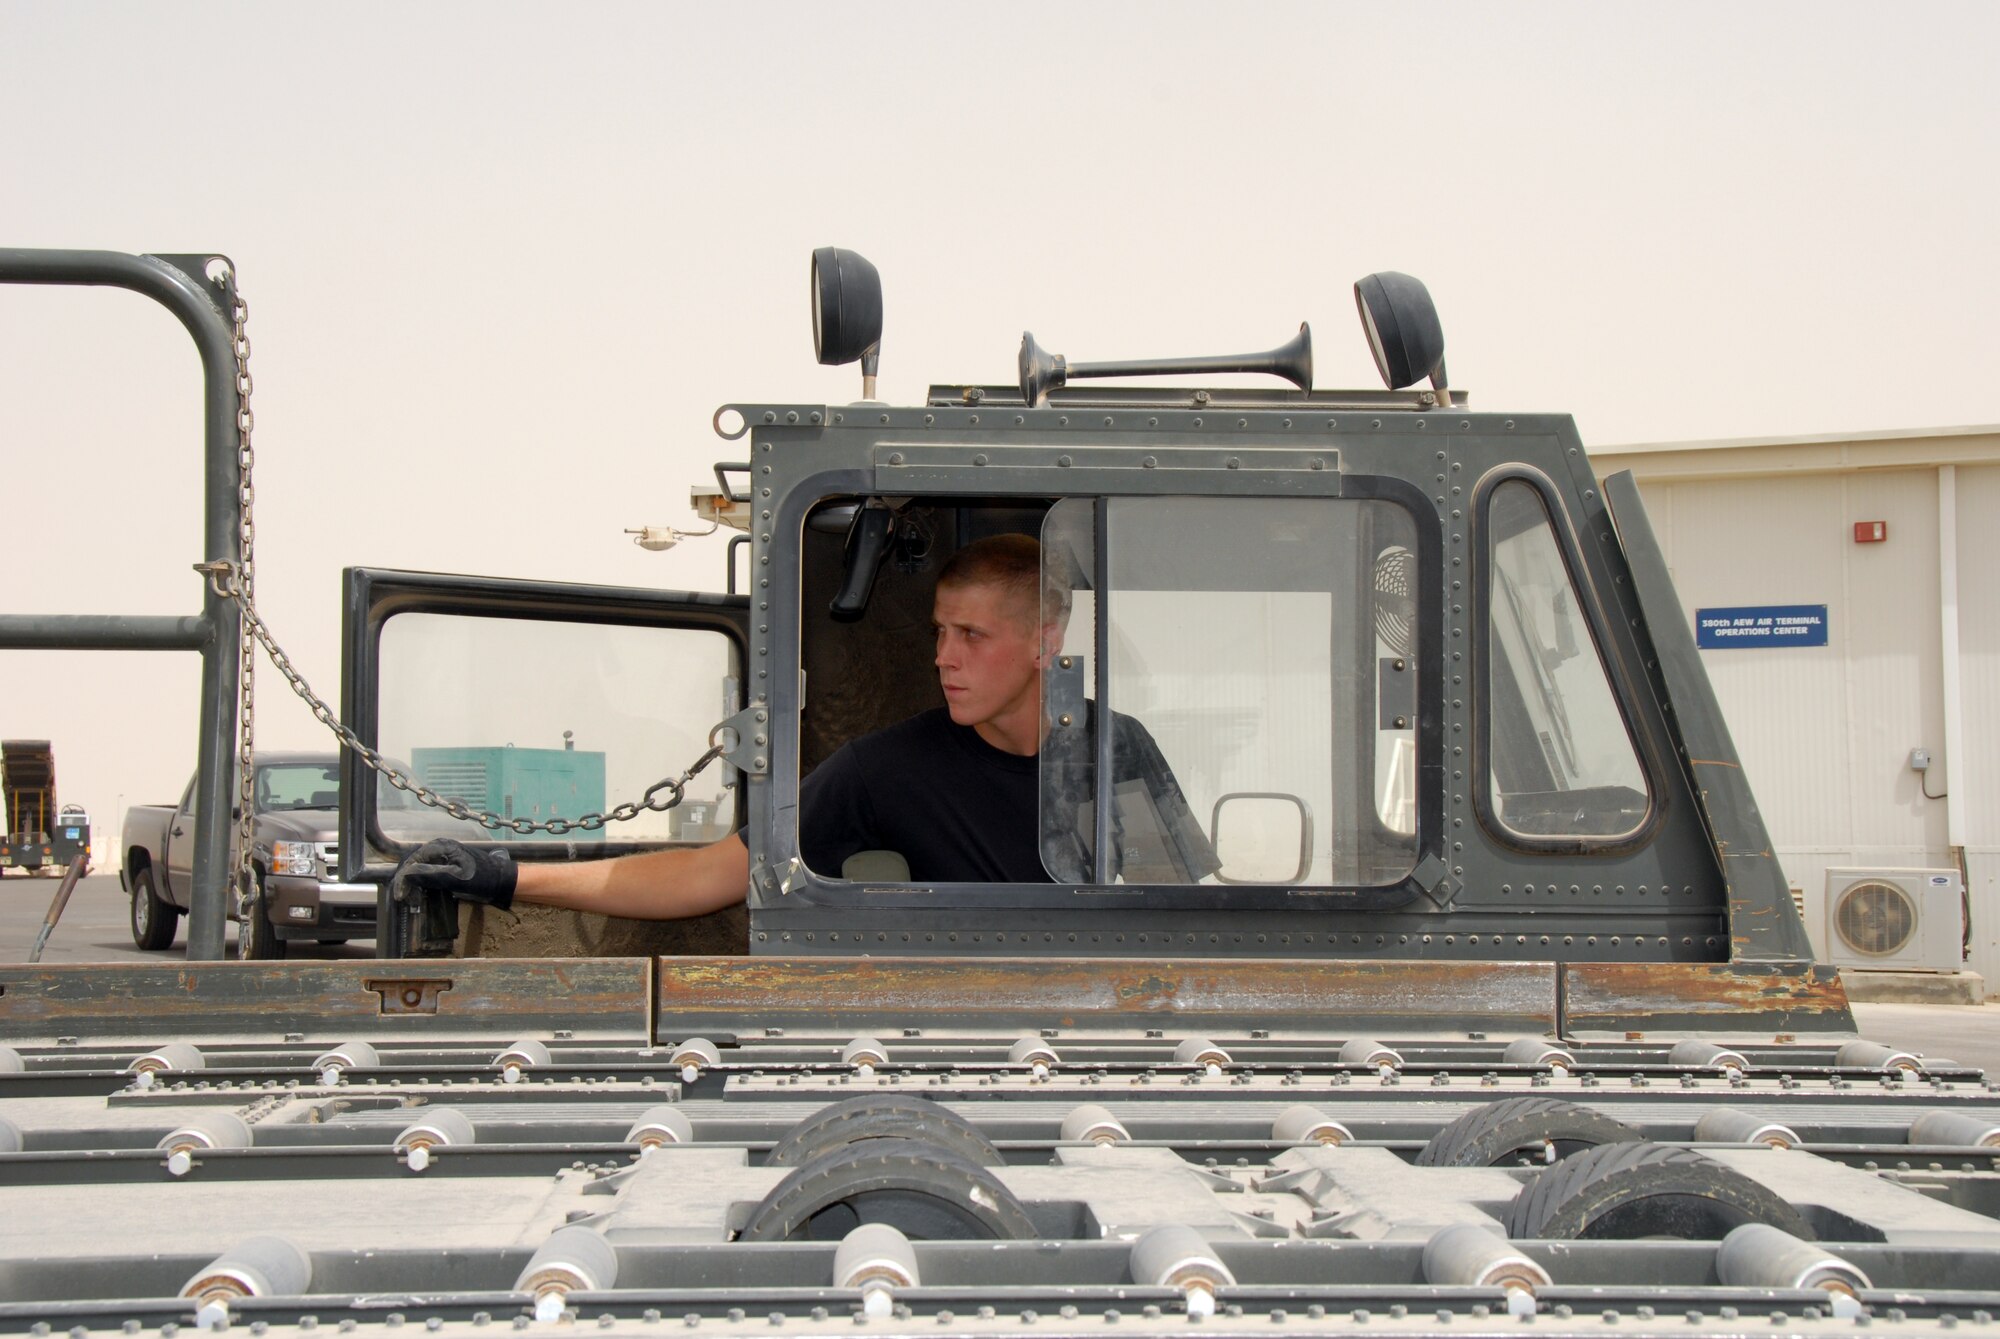 Staff Sgt. Patrick David, 380th Expeditionary Logistics Readiness Squadron Air Terminal Operation Center, looks on inside the cab of a 60K-Loader as a pallet is loaded July 2. (U.S. Air Force photo/Airman 1st Class Kelly LeGuillon)